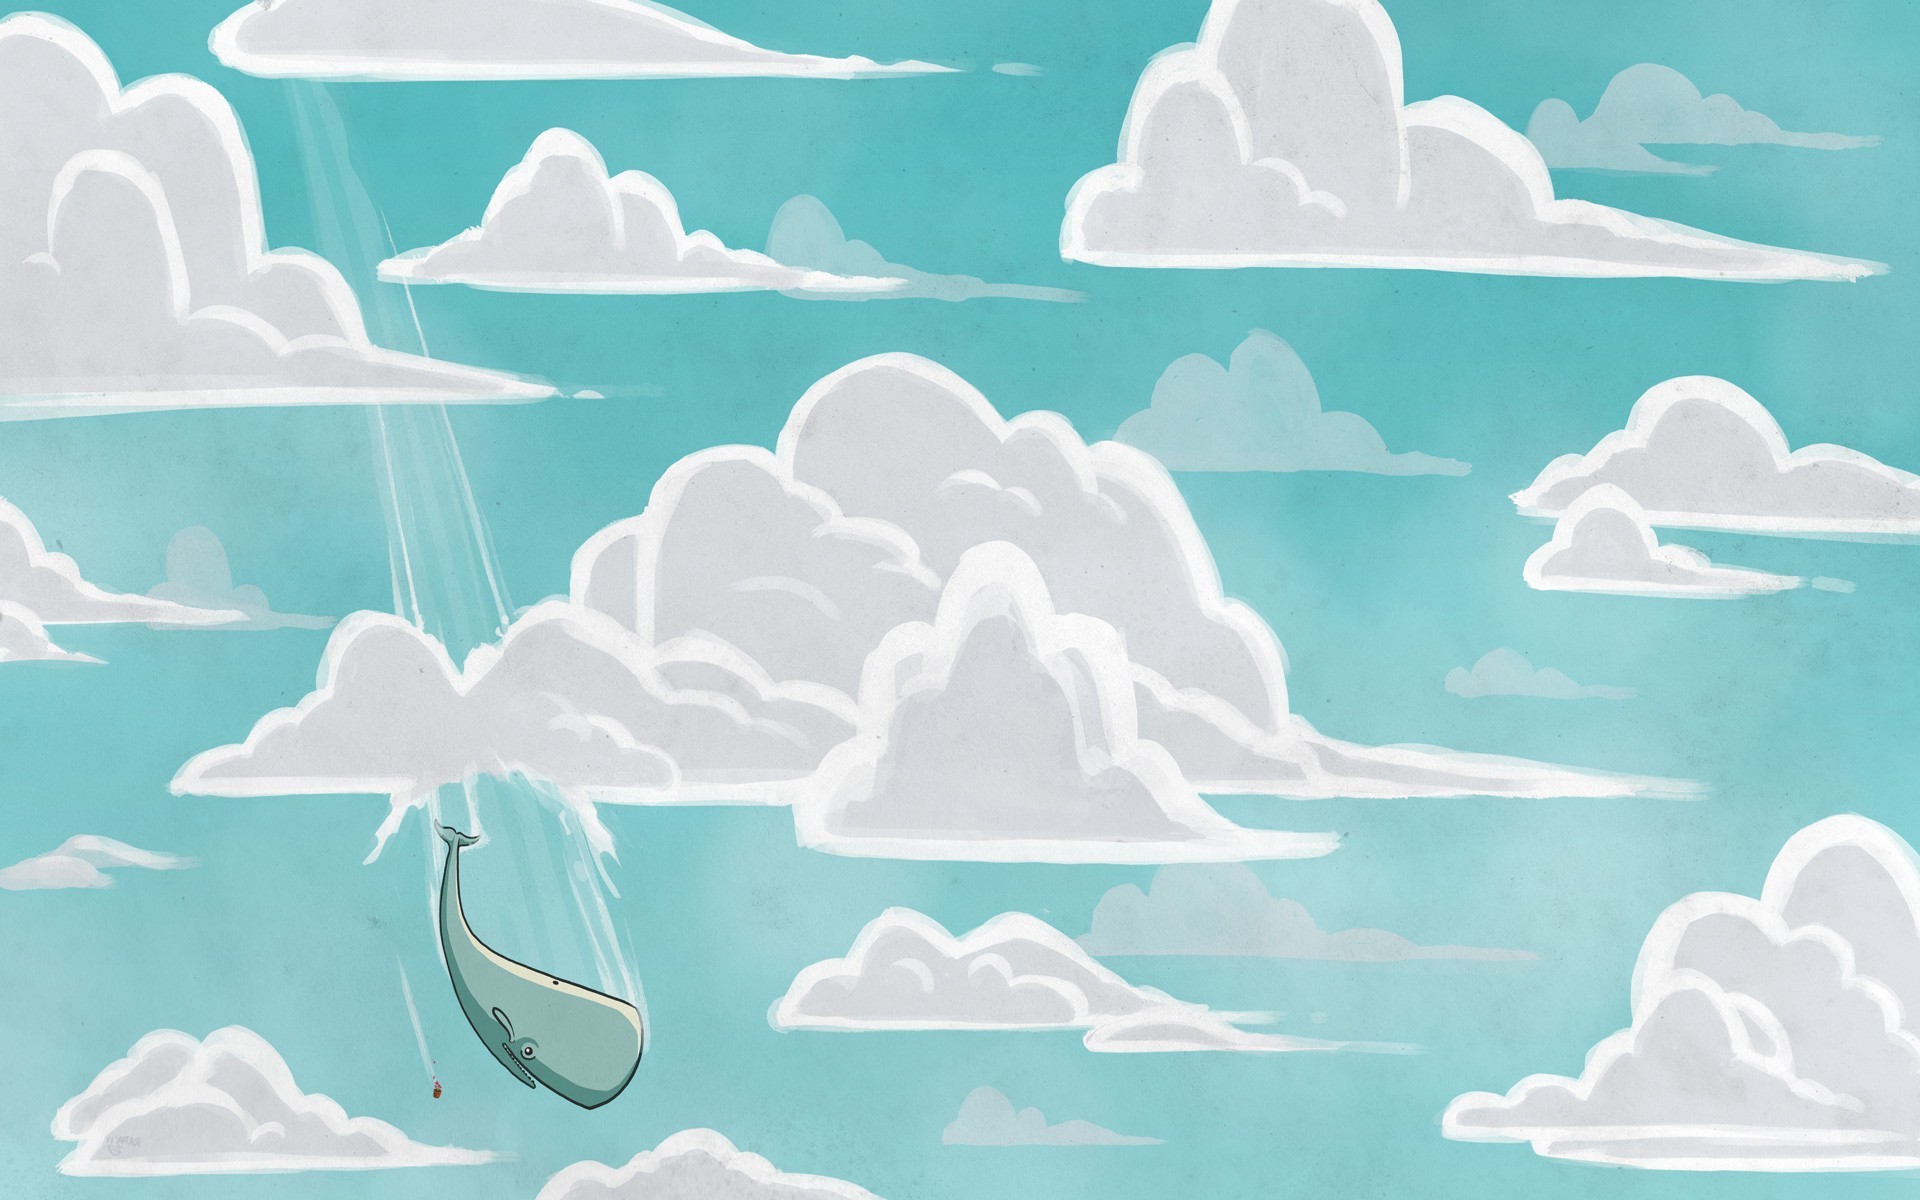 digital Art, Illustration, Nature, Flying, Whale, Moby Dick, Clouds, Sky, Fairy Tale, Flowerpot, Falling, The Hitchhikers Guide To The Galaxy Wallpaper